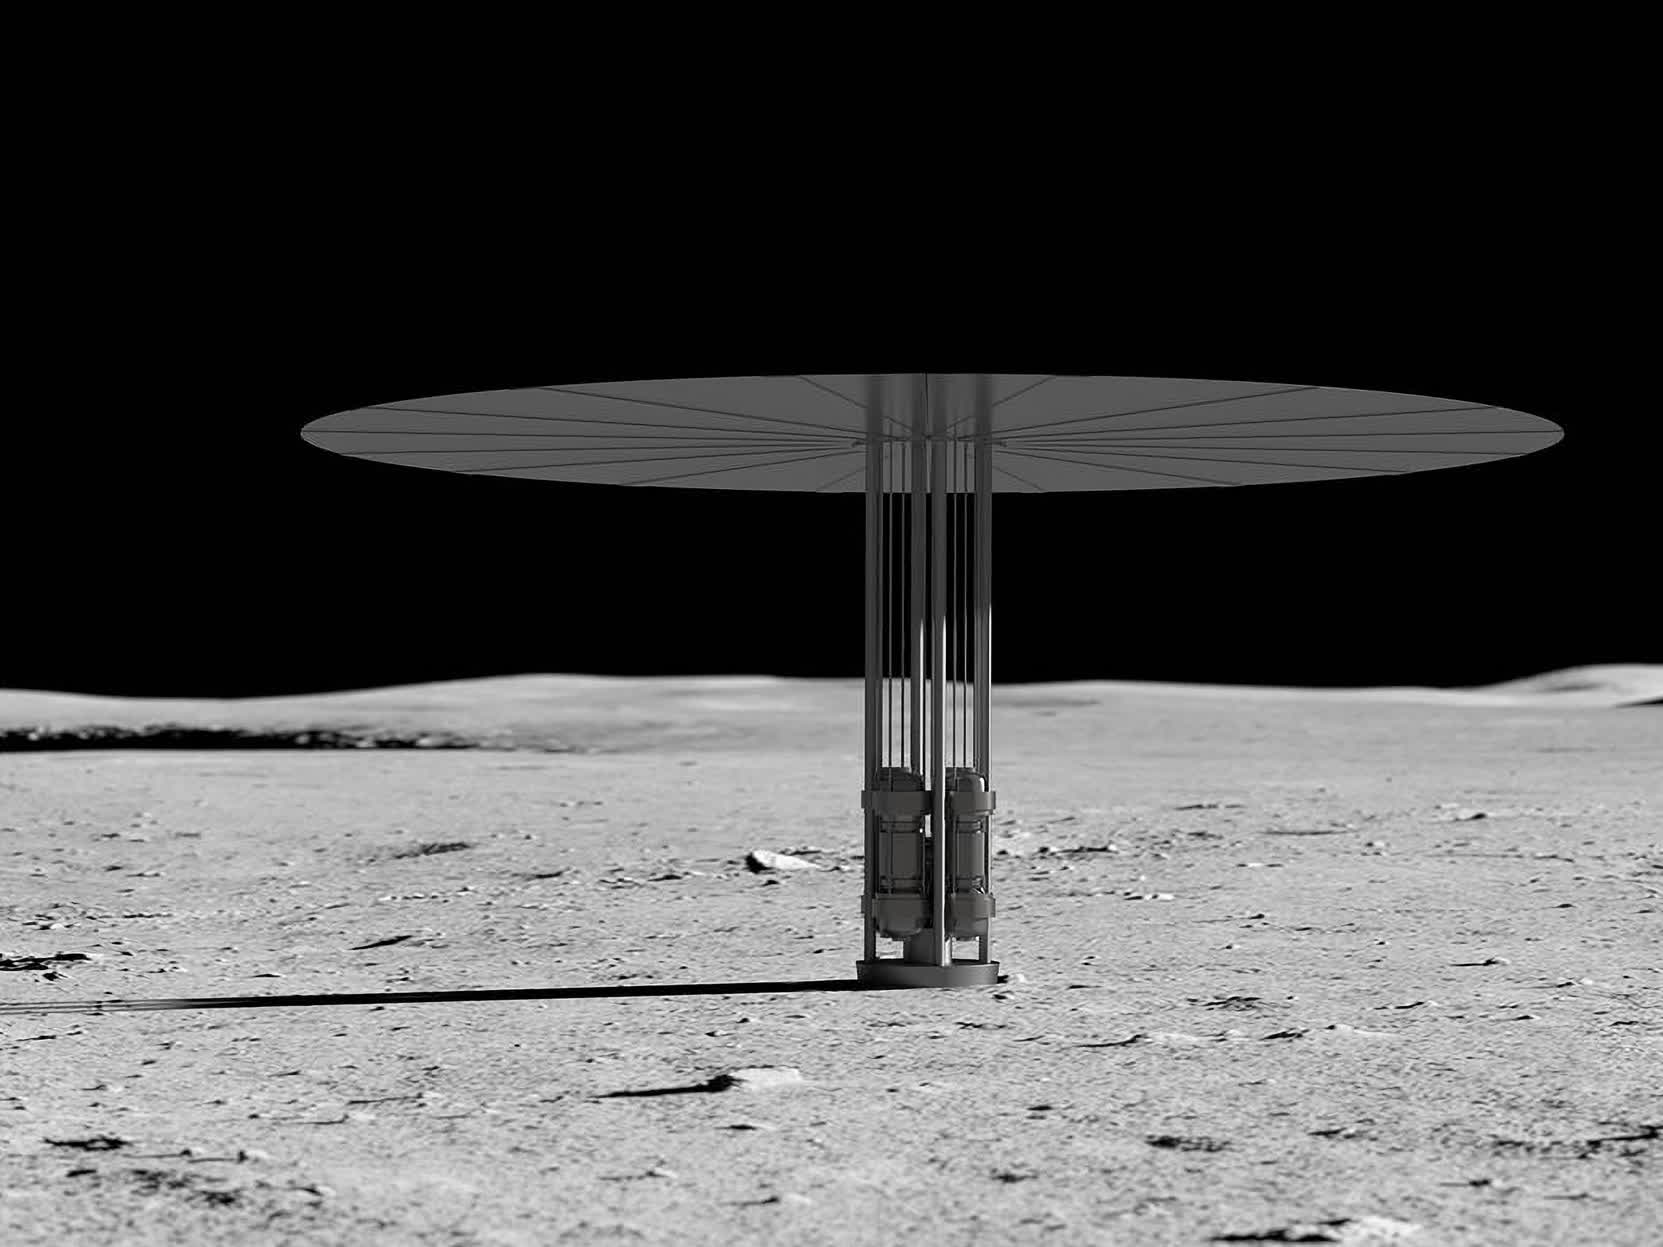 NASA awards three contracts to design a nuclear power plant for the Moon